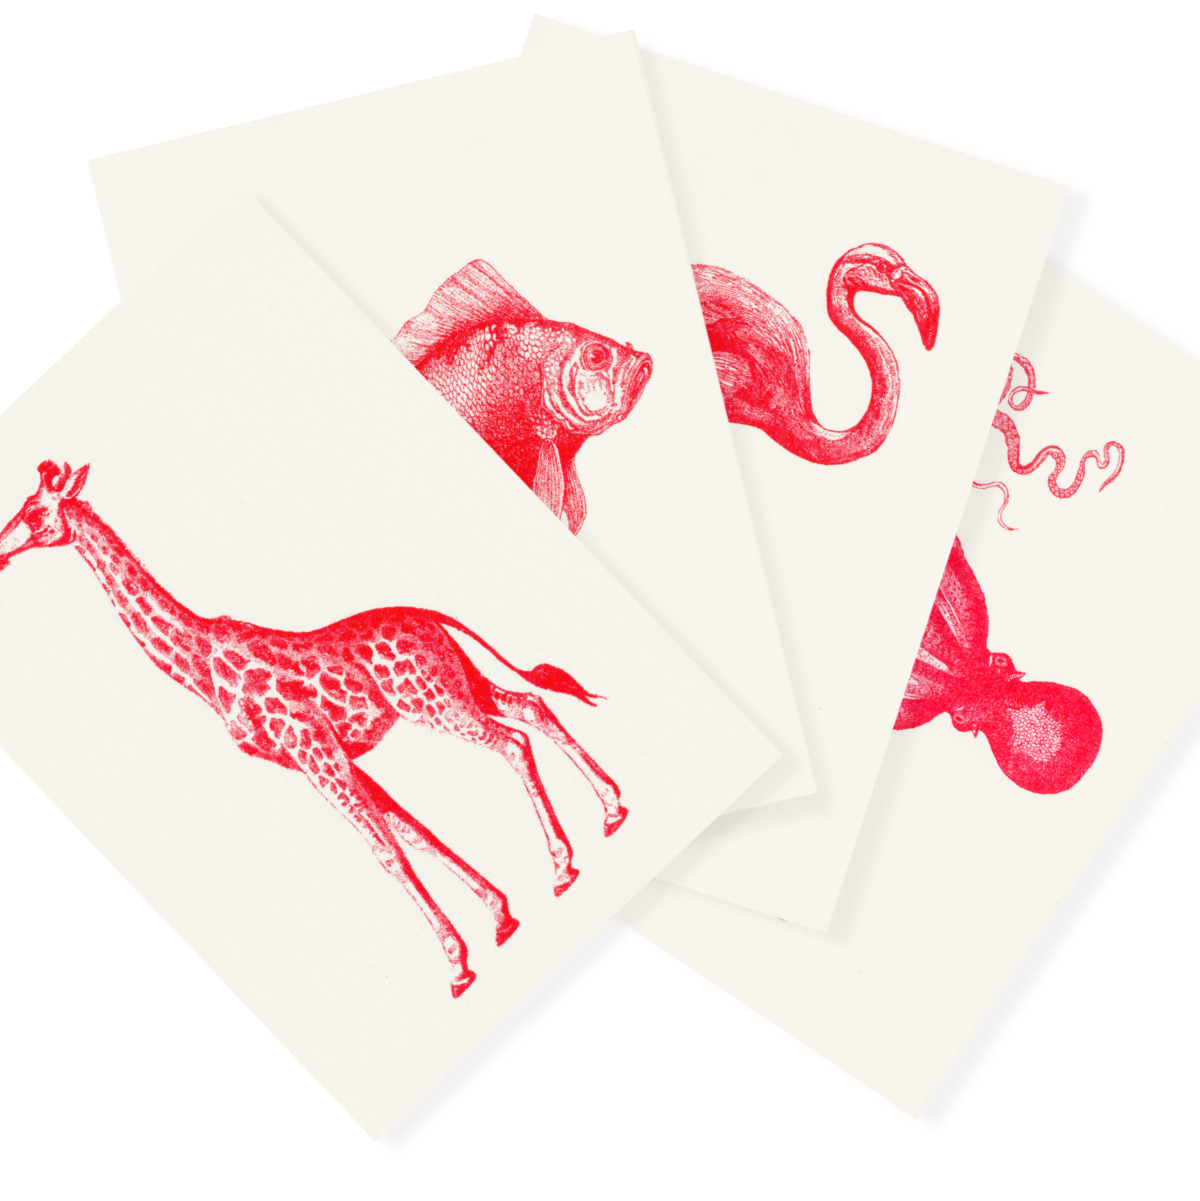 Roter Zoo | Red Zoo | 4 Monochrome Risograph Postcards